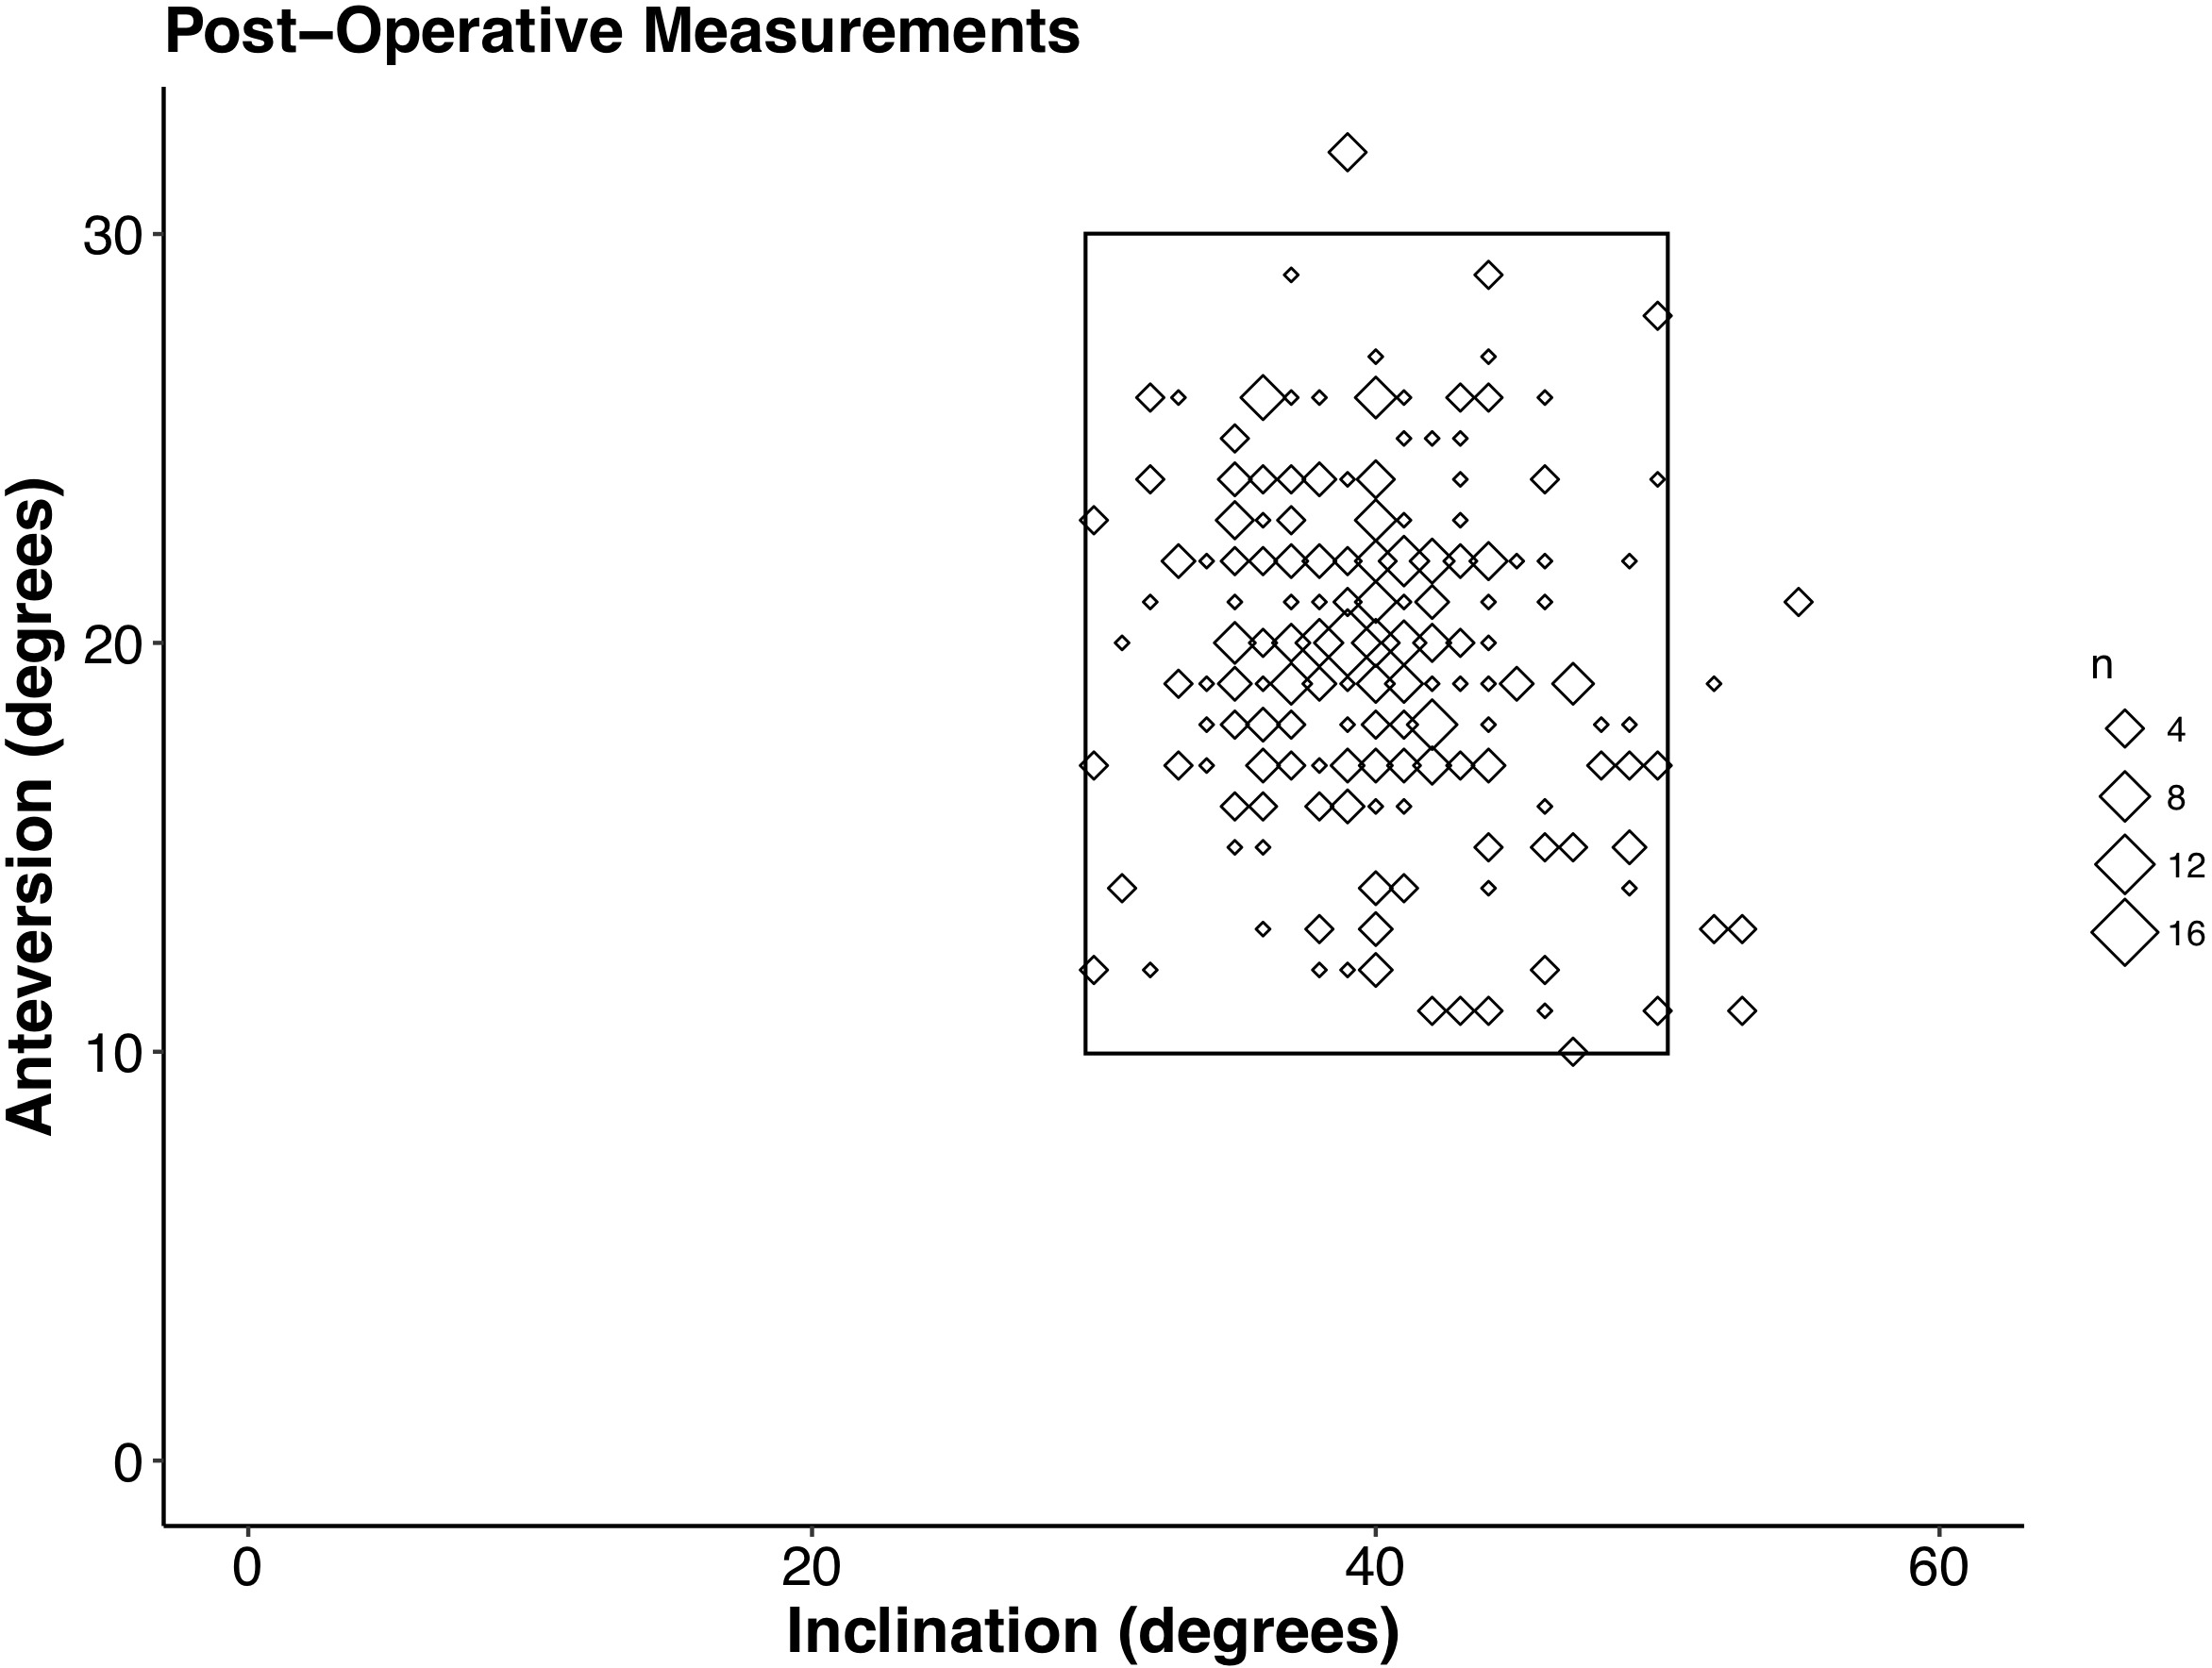 Fig. 5 
          Postoperative radiological measurements for inclination and anteversion of every hip relative to the target zone of 40° ± 10° for inclination and 20° ± 10° for anteversion. For the postoperative radiological measurements, 341 (96%) hips were placed within the zone for both inclination and anteversion. When broken down by inclination and anteversion, 345 hips (97%) were within target for inclination and 350 (99%) for anteversion.
        